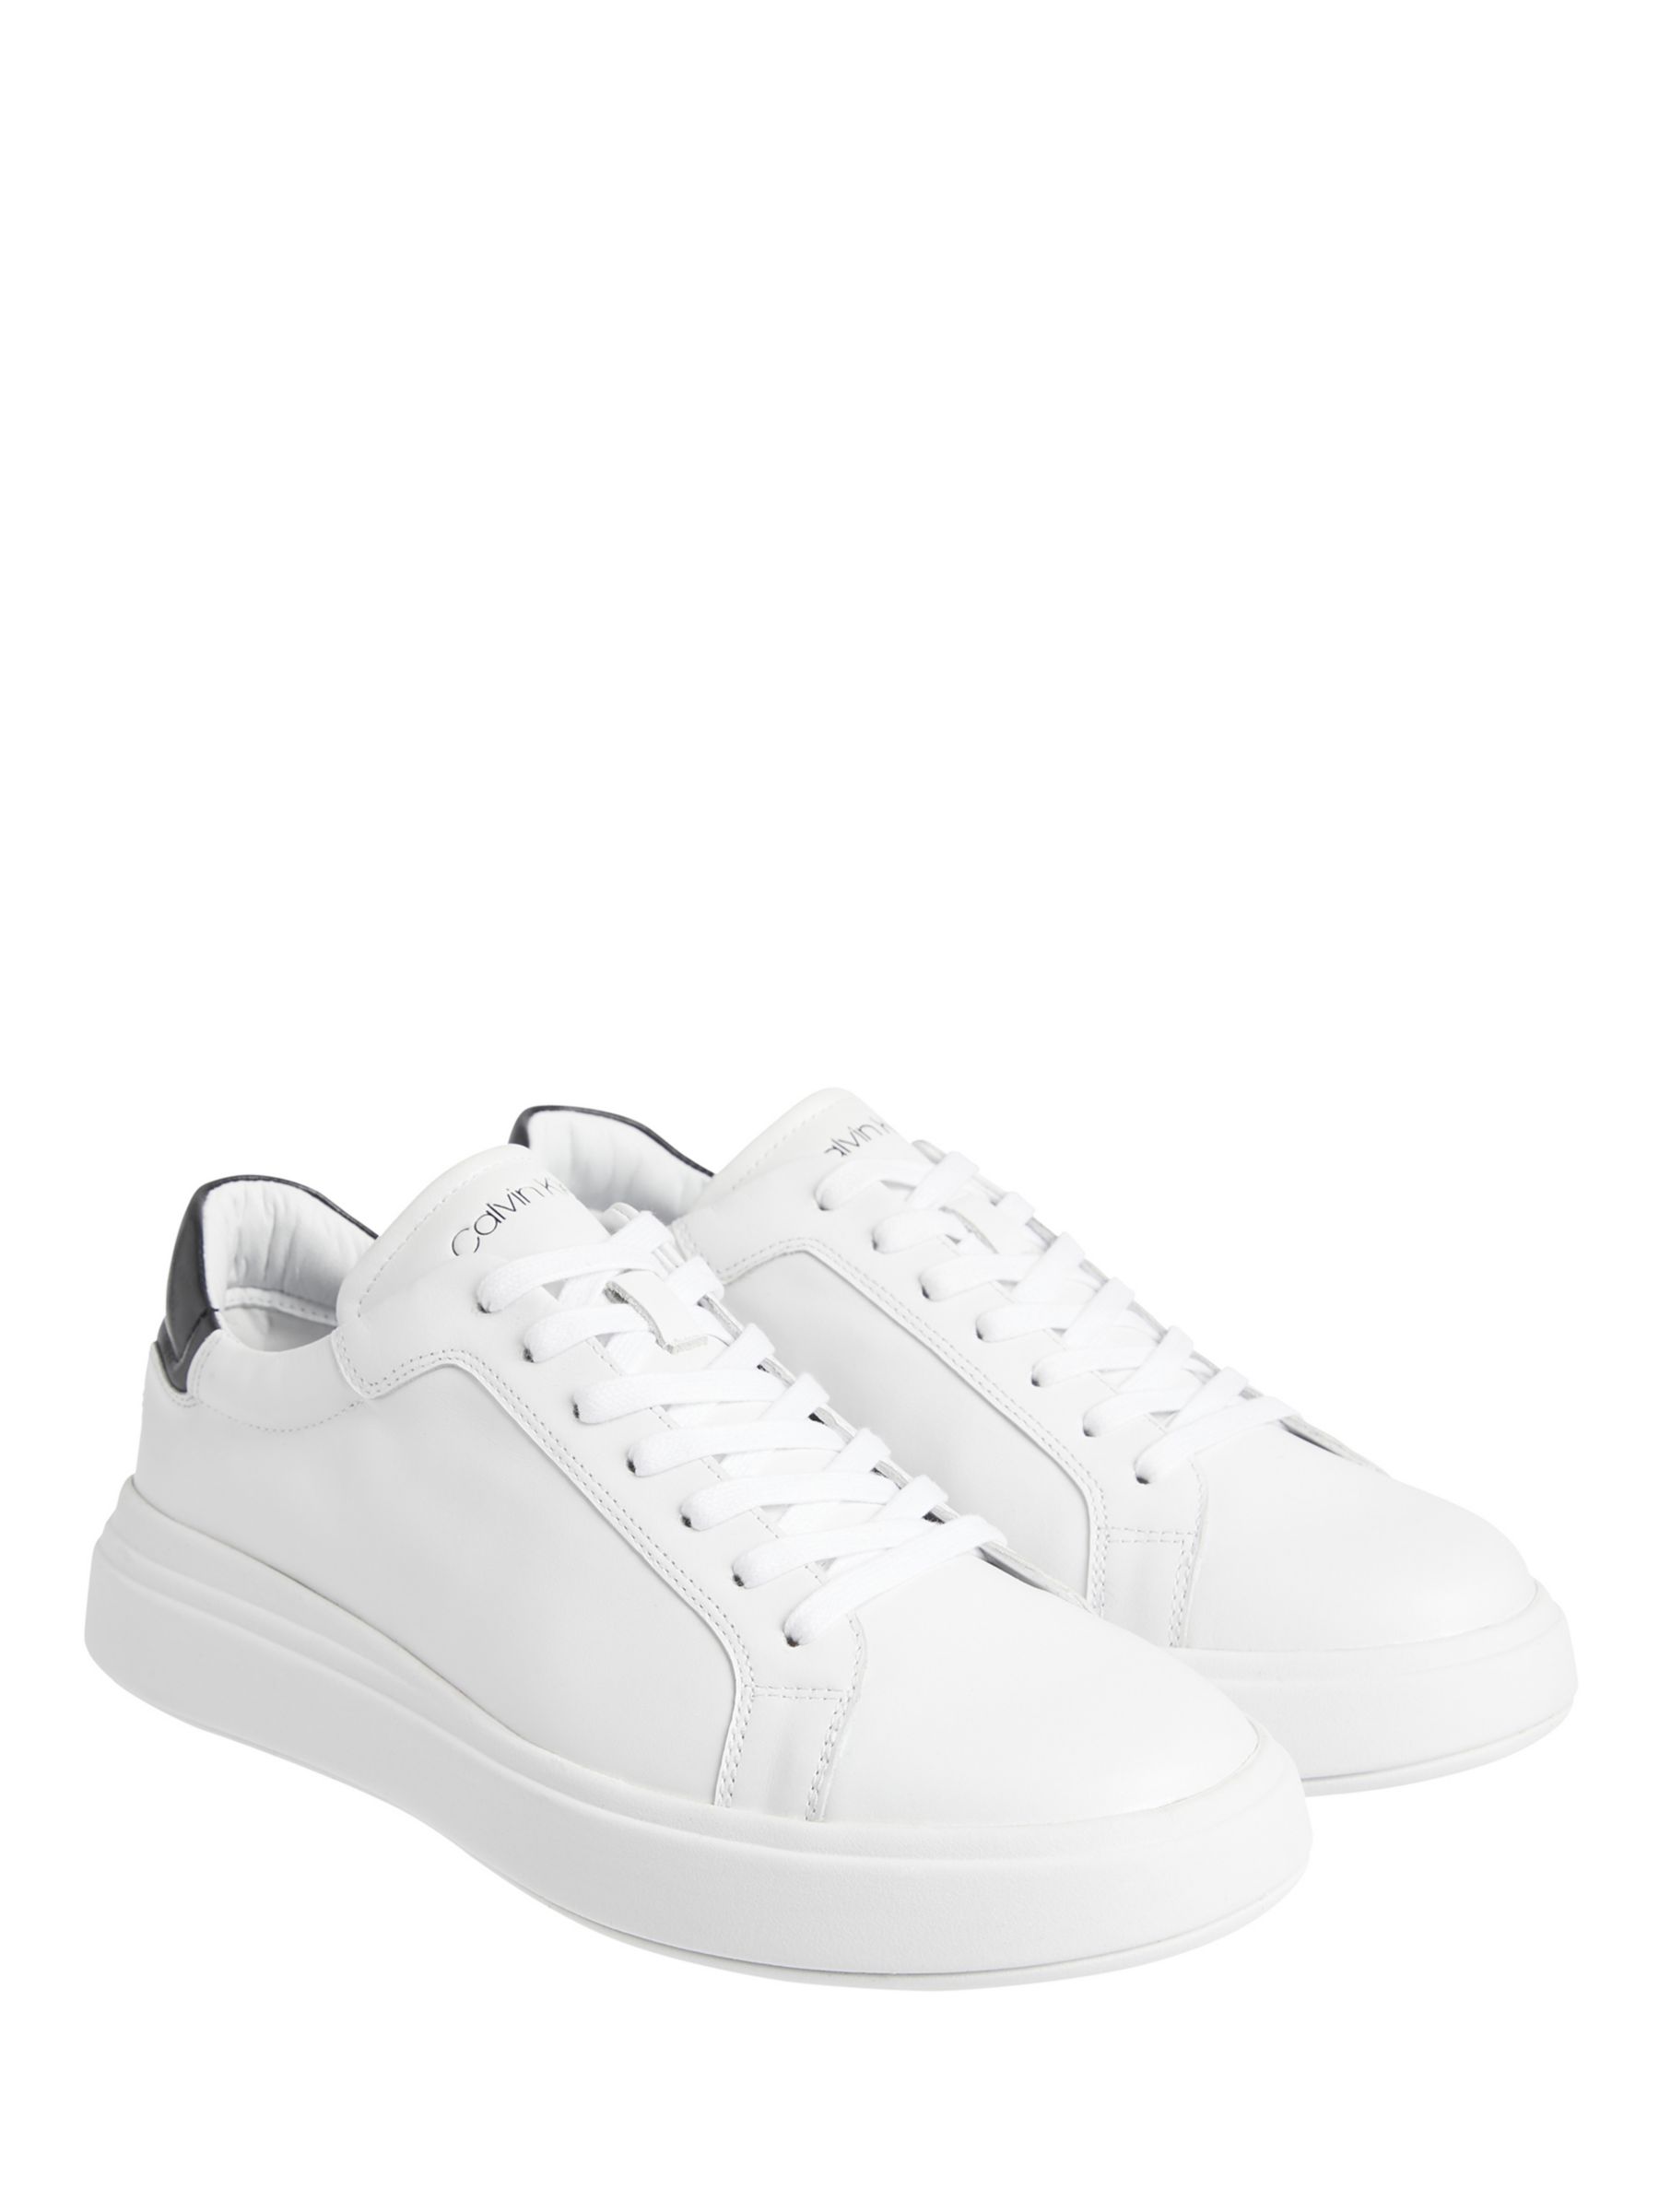 Calvin Klein Leather Low Top Lace Up Trainers, White/Black at John ...